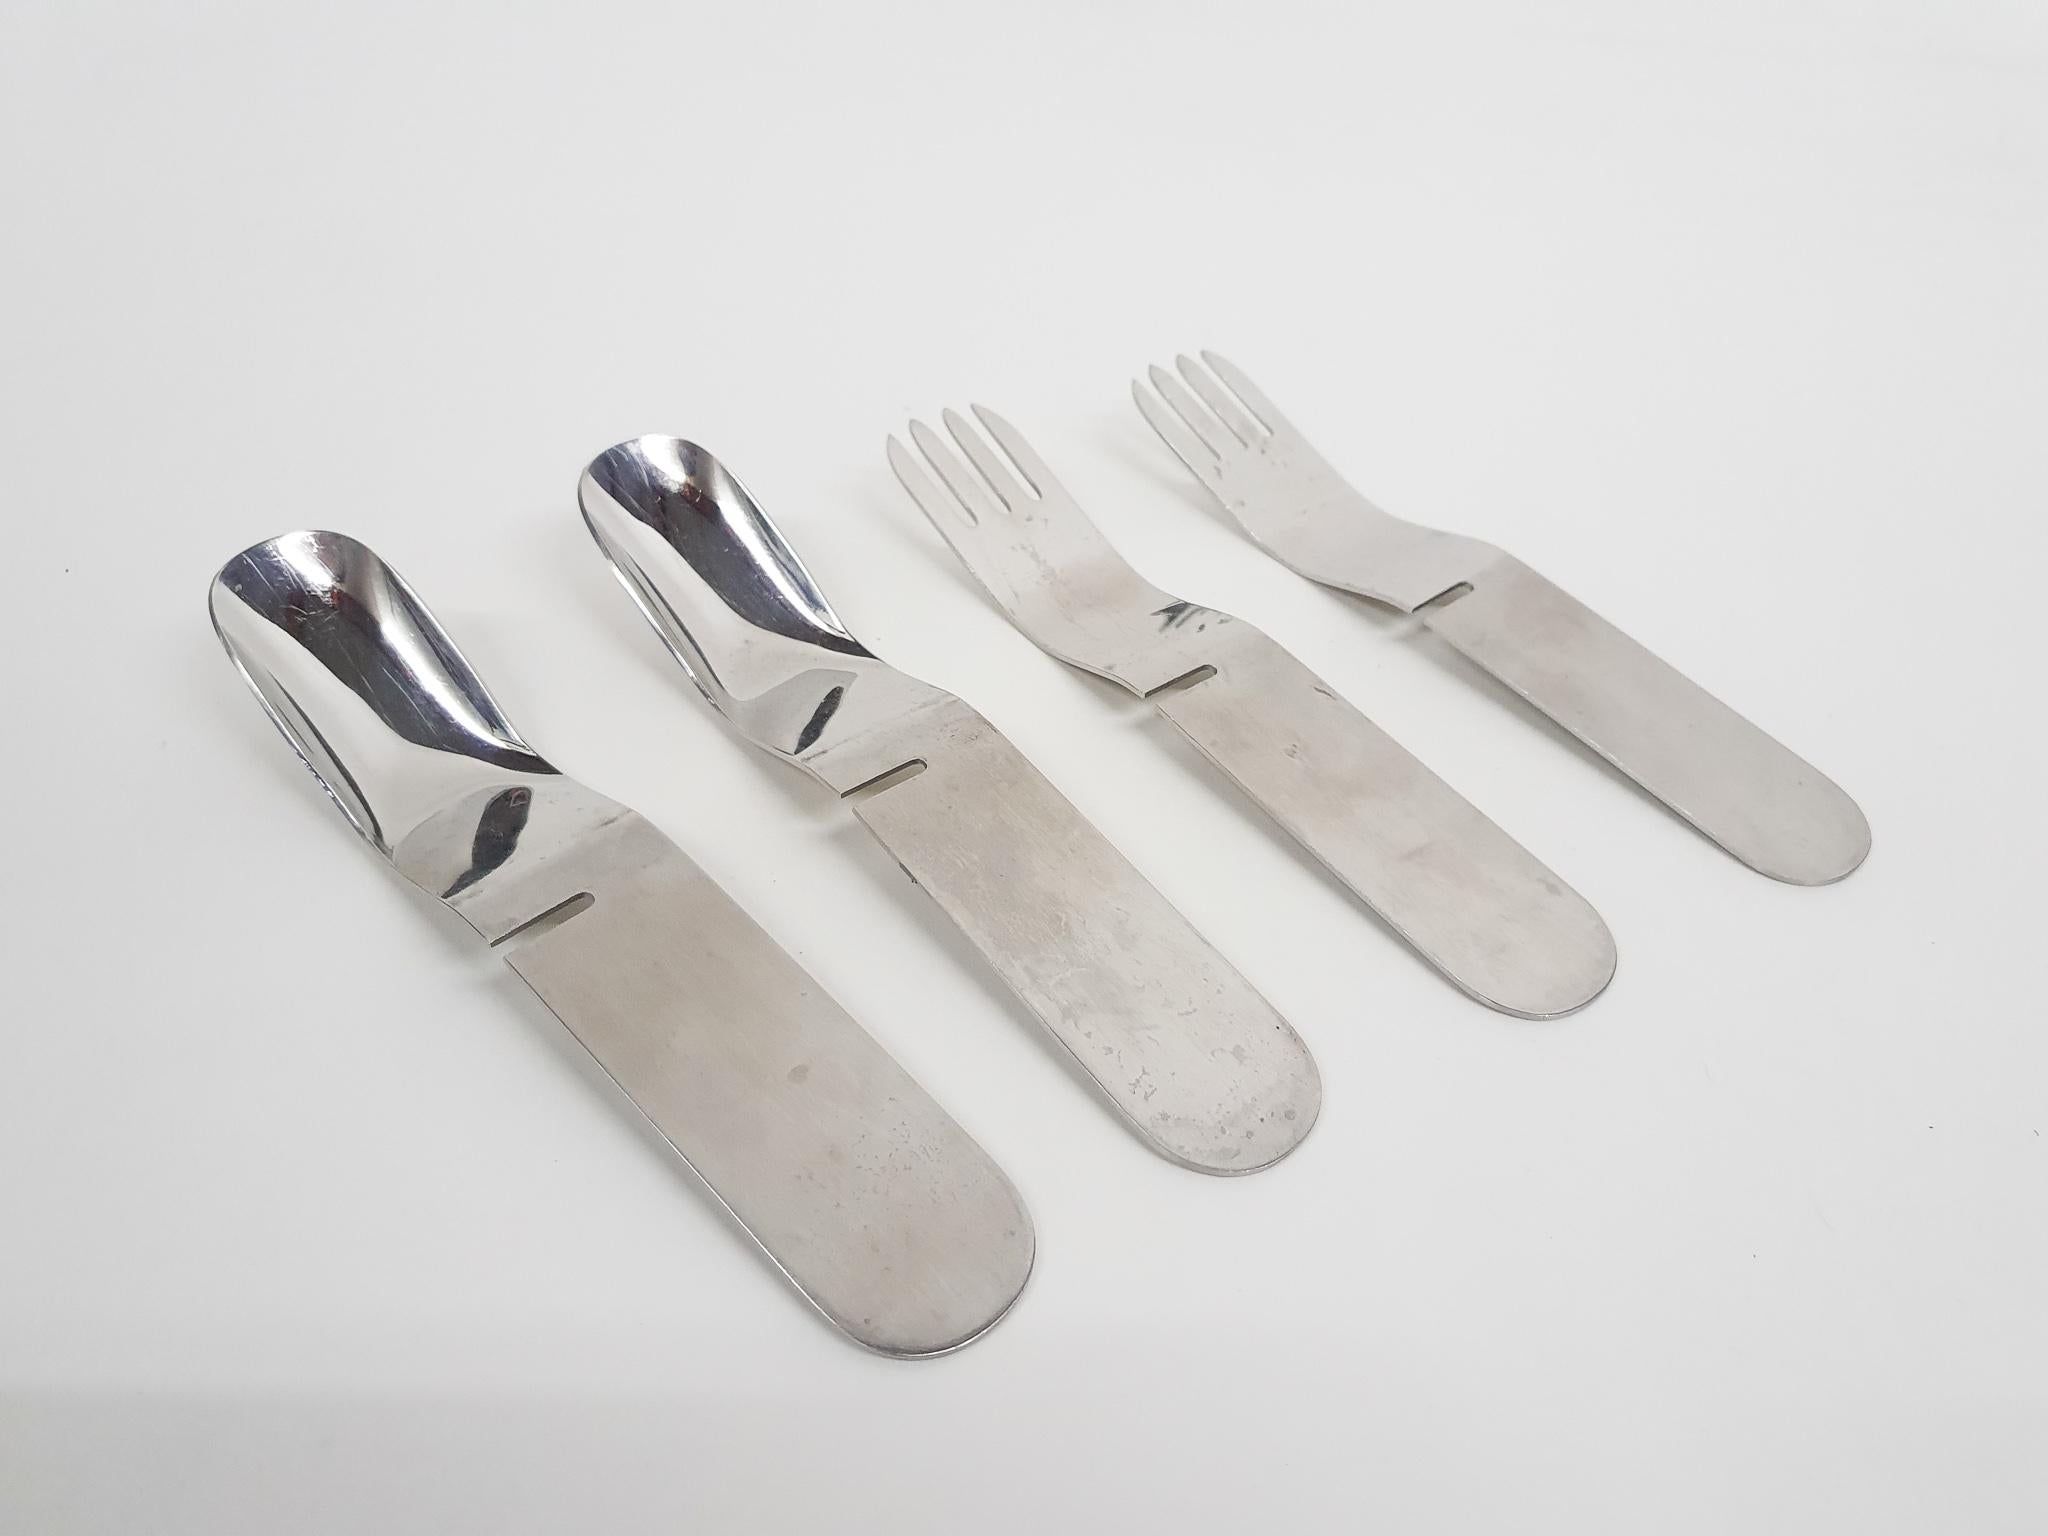 This rare set comes from the La Bomba picnic sets designed by Helen von Boch and Federigo Fabbrini. The set normally comes in a set of 4 ( 4x knife, spoon, fork, and teaspoon). We only have 2 spoons and 2 forks. They are interlocking and nesting.